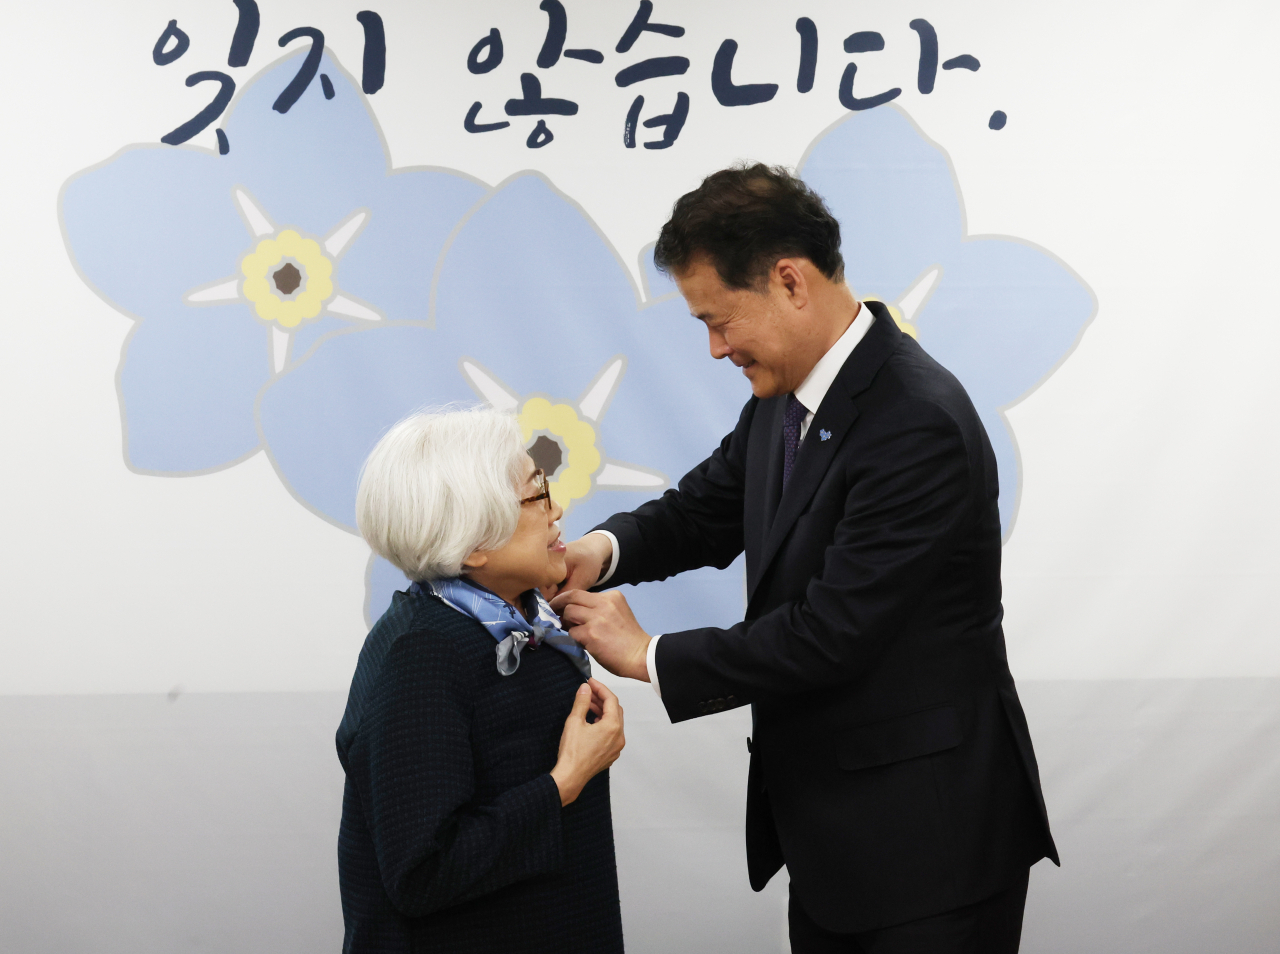 South Korean Unification Minister Kim Yung-ho (right) attaches a forget-me-not badge to Lee Mi-il, former president of the Korean War Abductees Family Union, whose father was abducted by North Korea in September 1950, during an event Wednesday at the government complex building. (Yonhap)